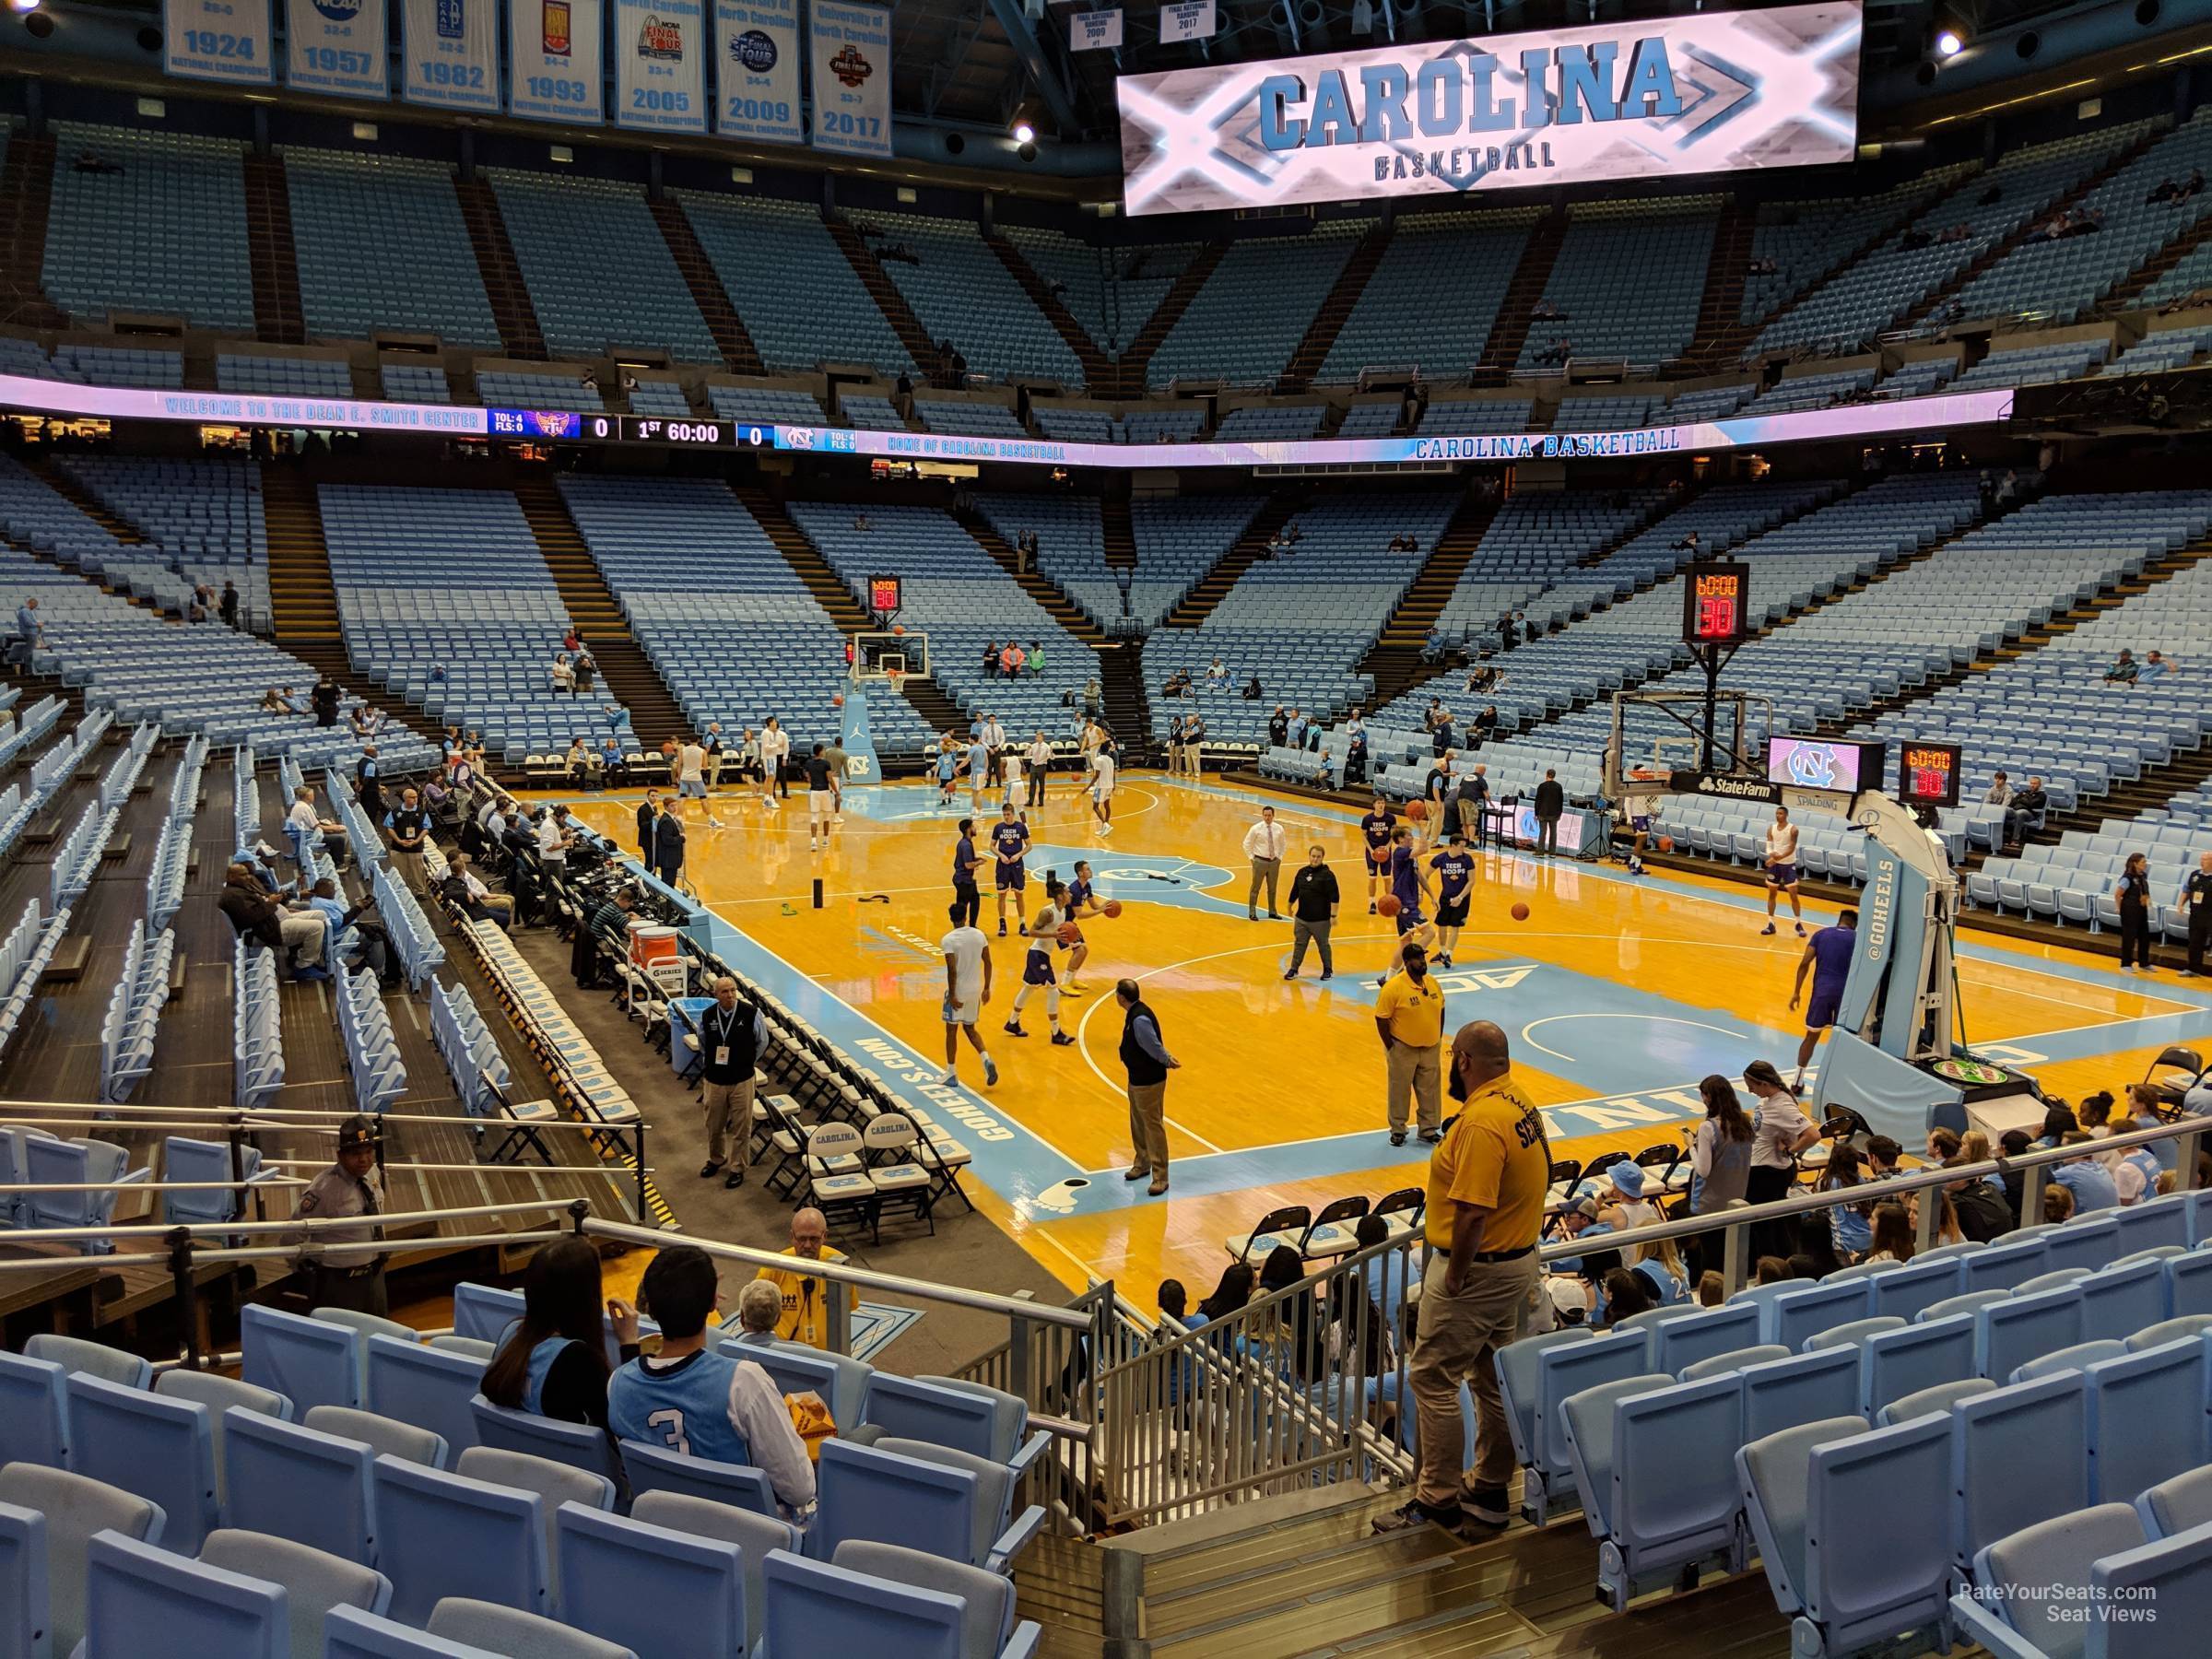 section 115, row m seat view  - dean smith center